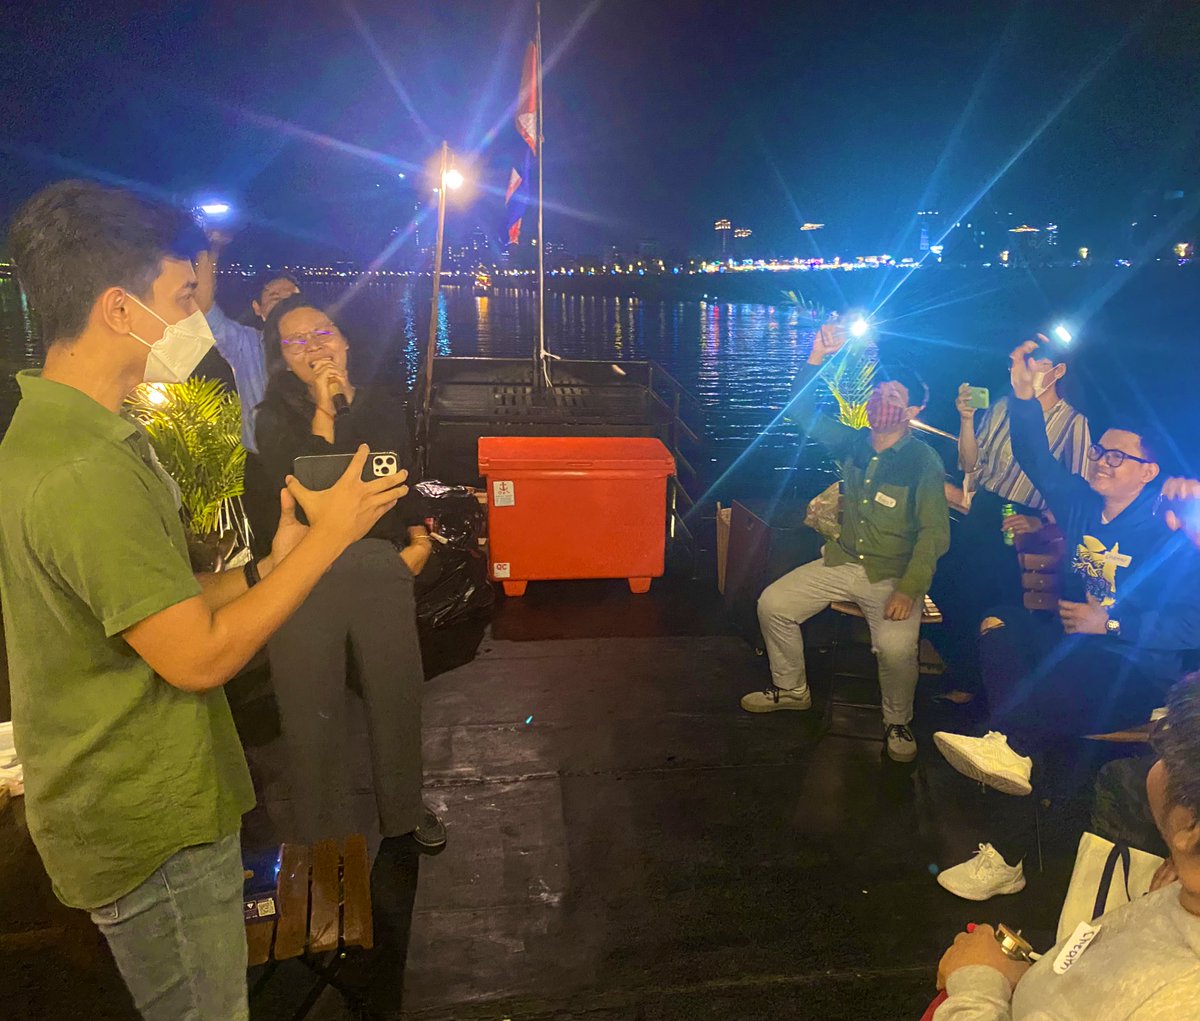 Our @USAYCkh annual night on the Mekong was a success! I am so impressed by the resilience & creativity of the hardworking members of our Ambassador's Youth Council. We celebrated accomplishments against all odds in 2021 and look forward to an even better 2022!